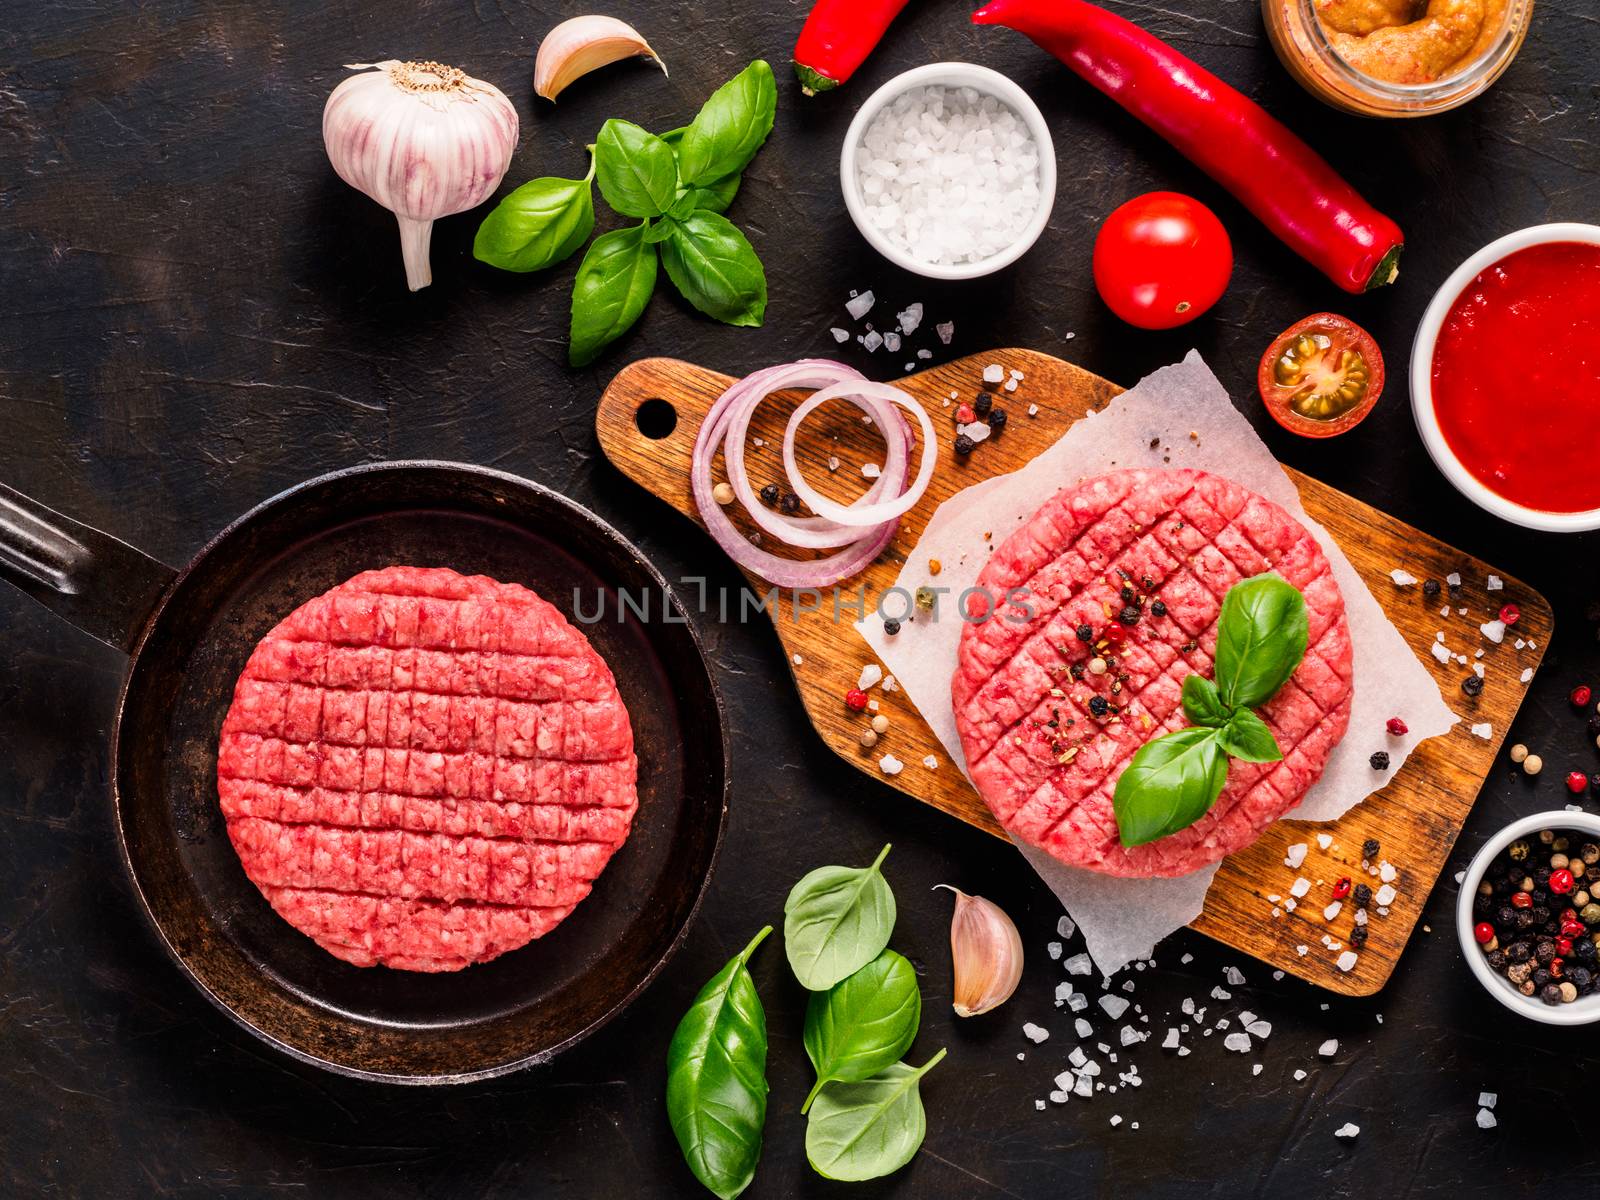 Raw beef meat steak cutlet for burger in pan, cutlet on wooden cutting board with spices, vegetables,sauces ketchup and mustard on black concrete background.Making homemade burger.Top view or flat lay